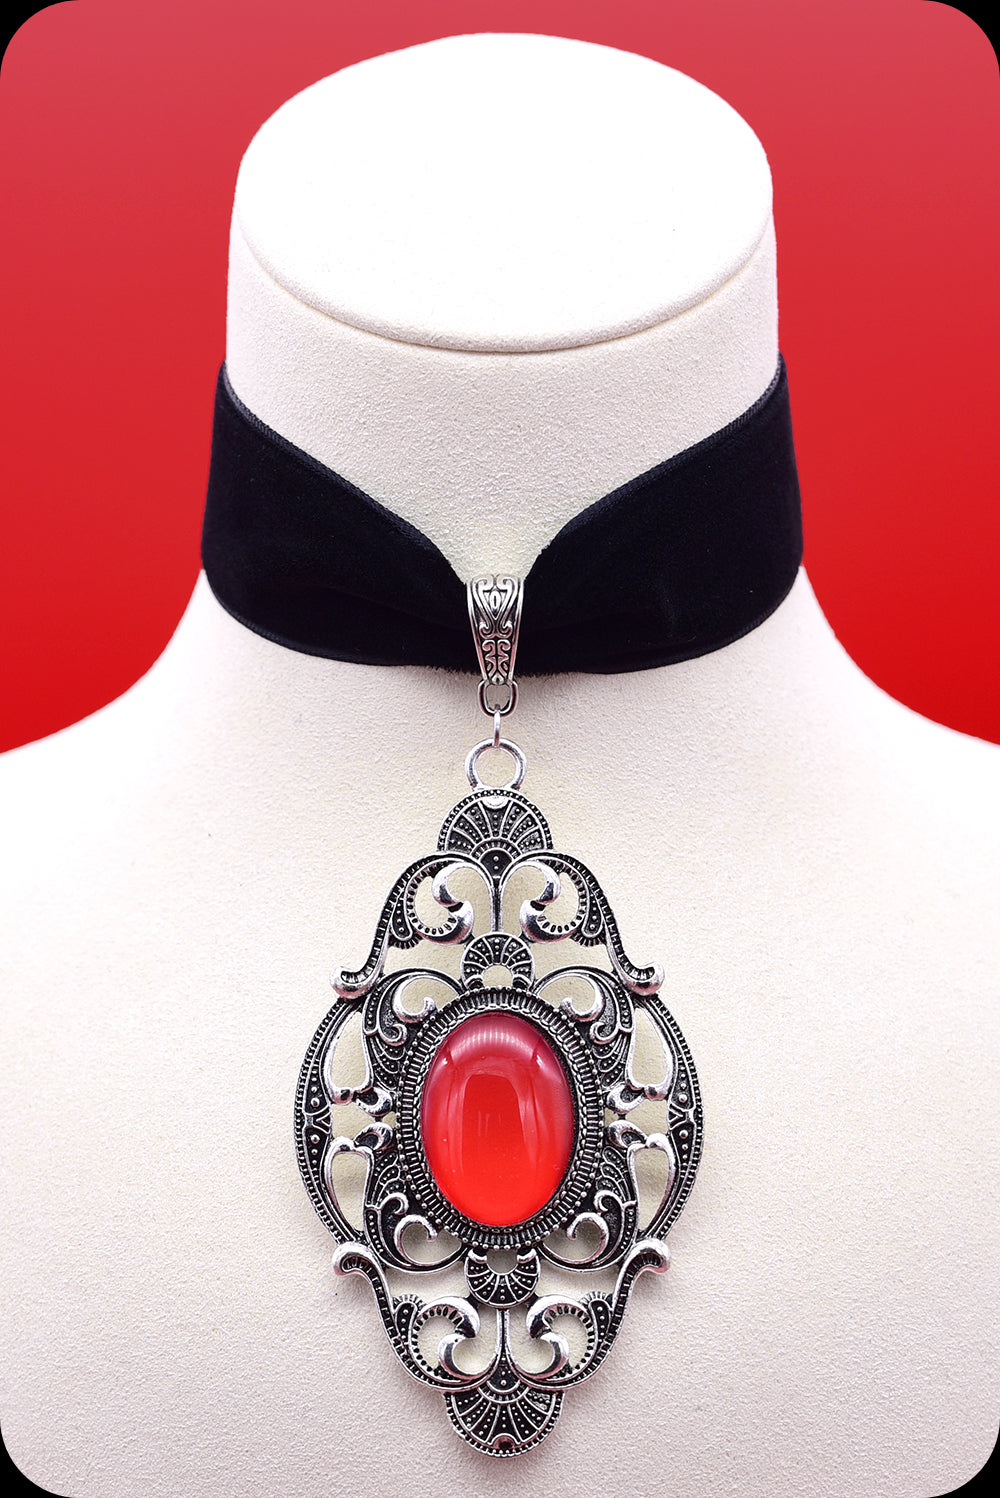 A black velvet antique silver red cabochon choker necklace by Scorpio Rising